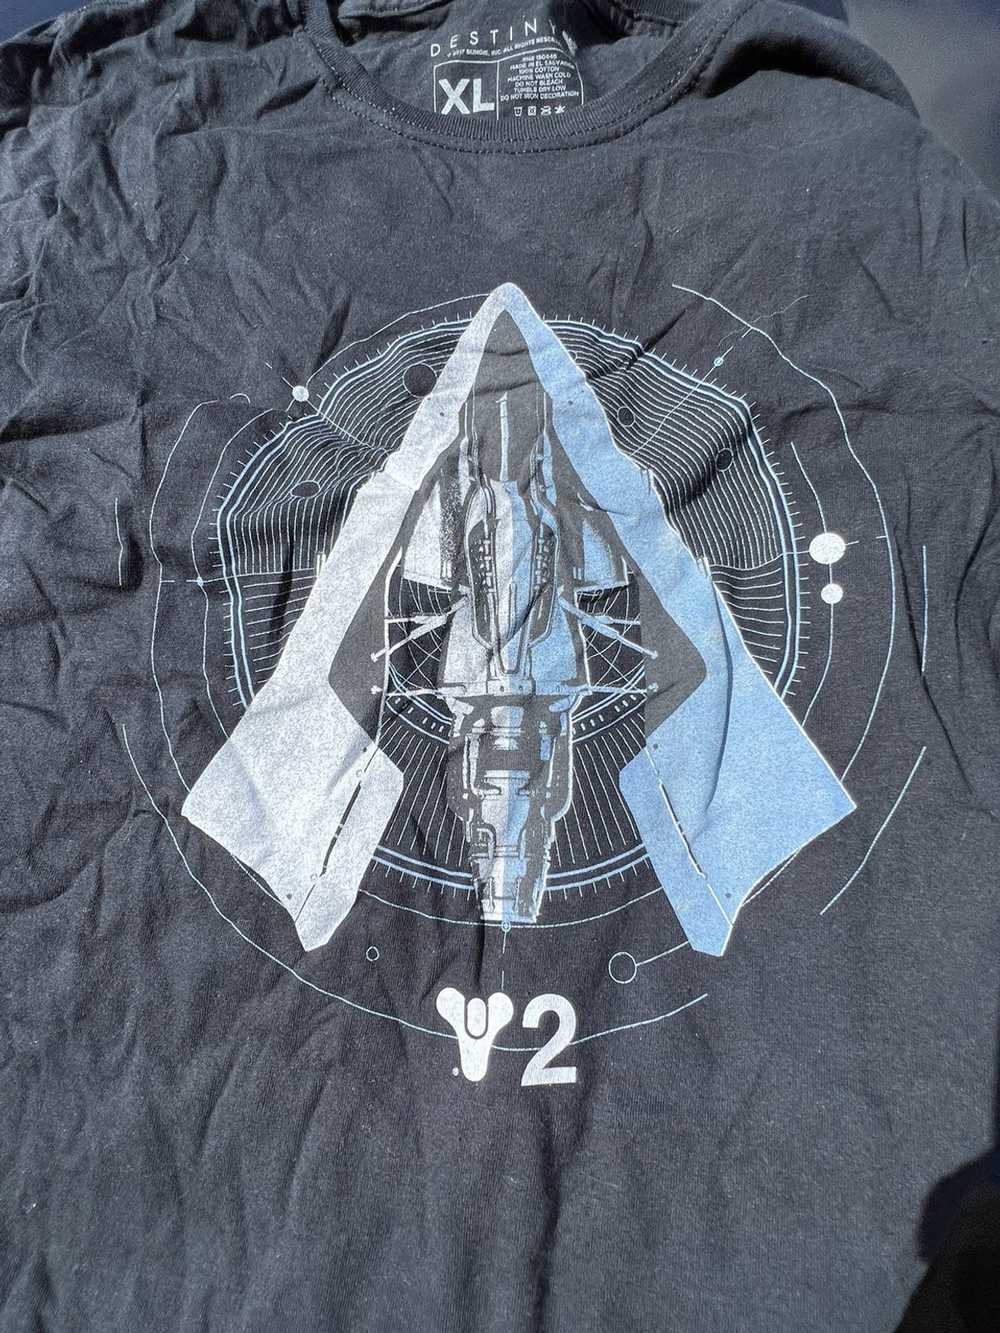 The Game Destiny 2 lootwear game promo tee - image 2